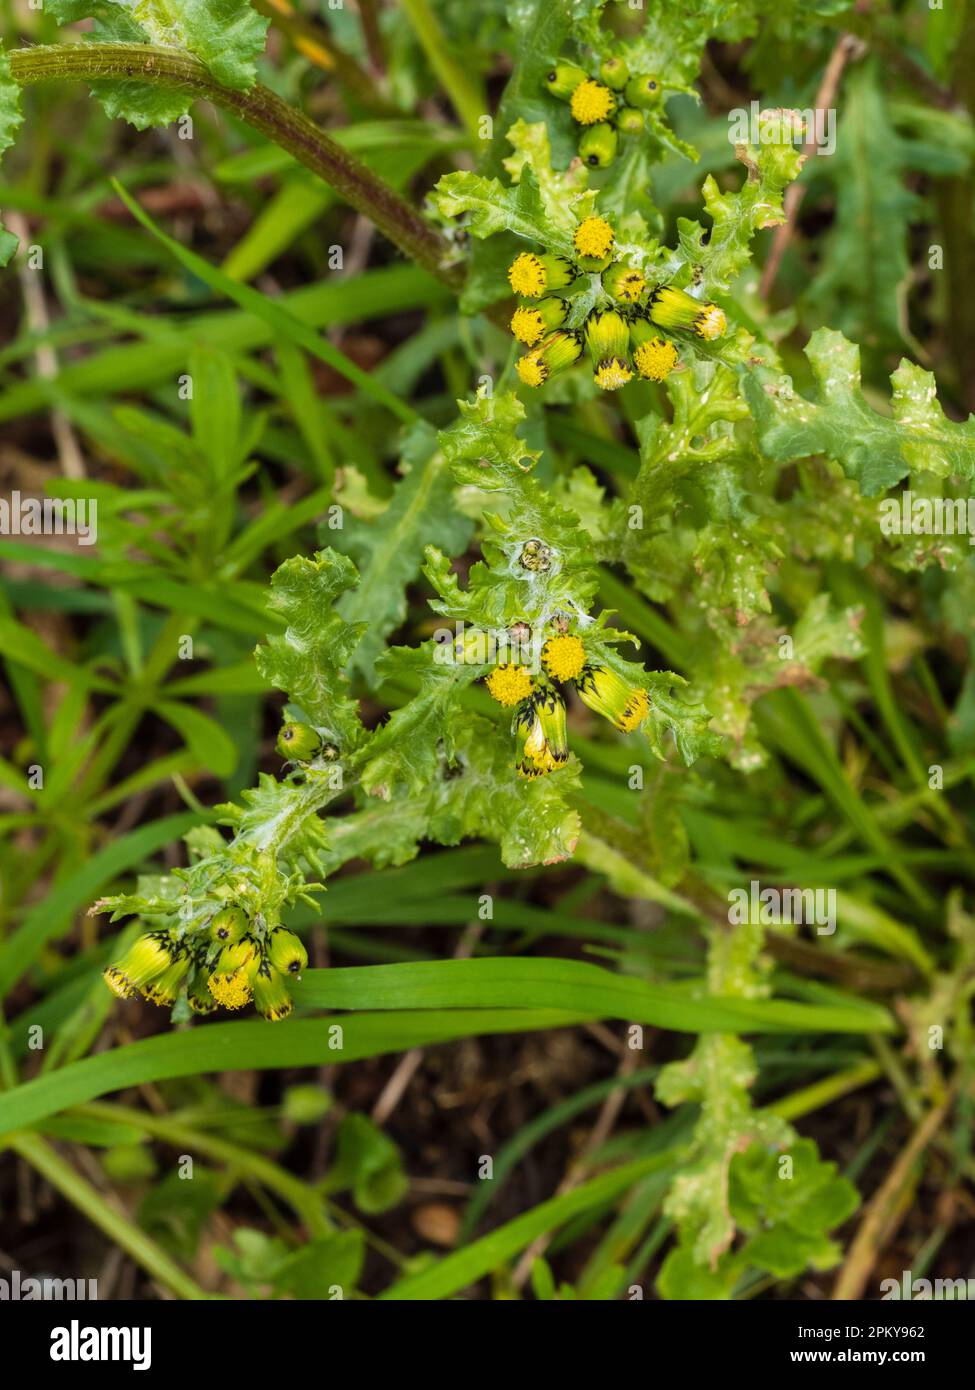 Yellow flowers in the branched heads of the annual UK weed of waste ground and gardens, Senecio vulgaris, groundsel Stock Photo